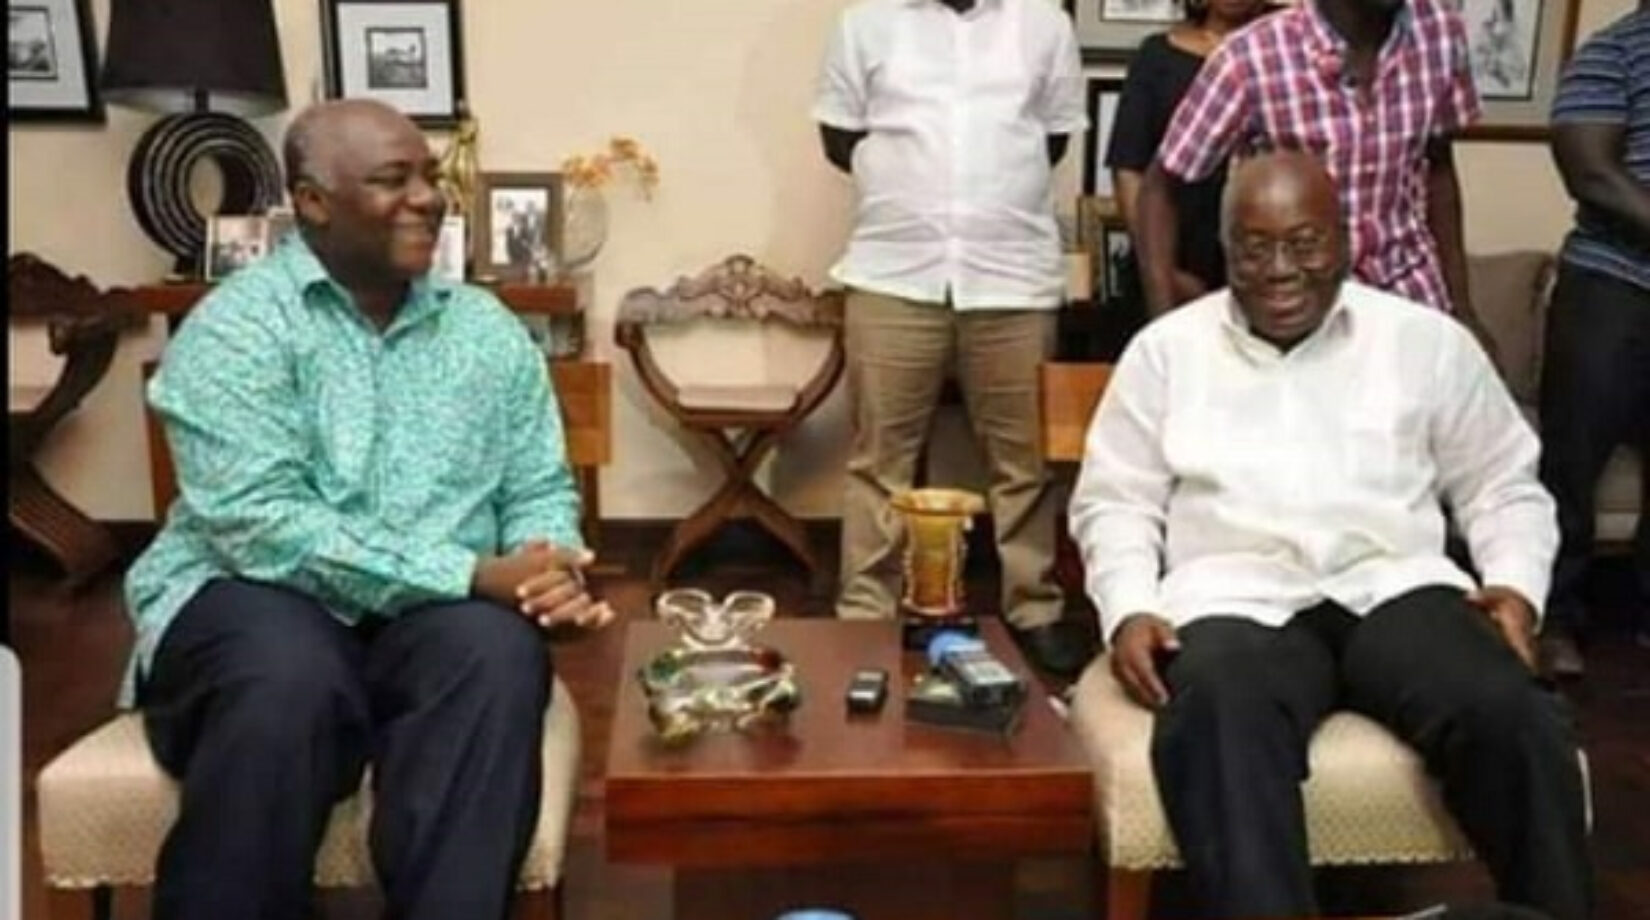 Reshuffle your Ministers to infuse new ideas-Addai Nimoh to Akufo- Addo